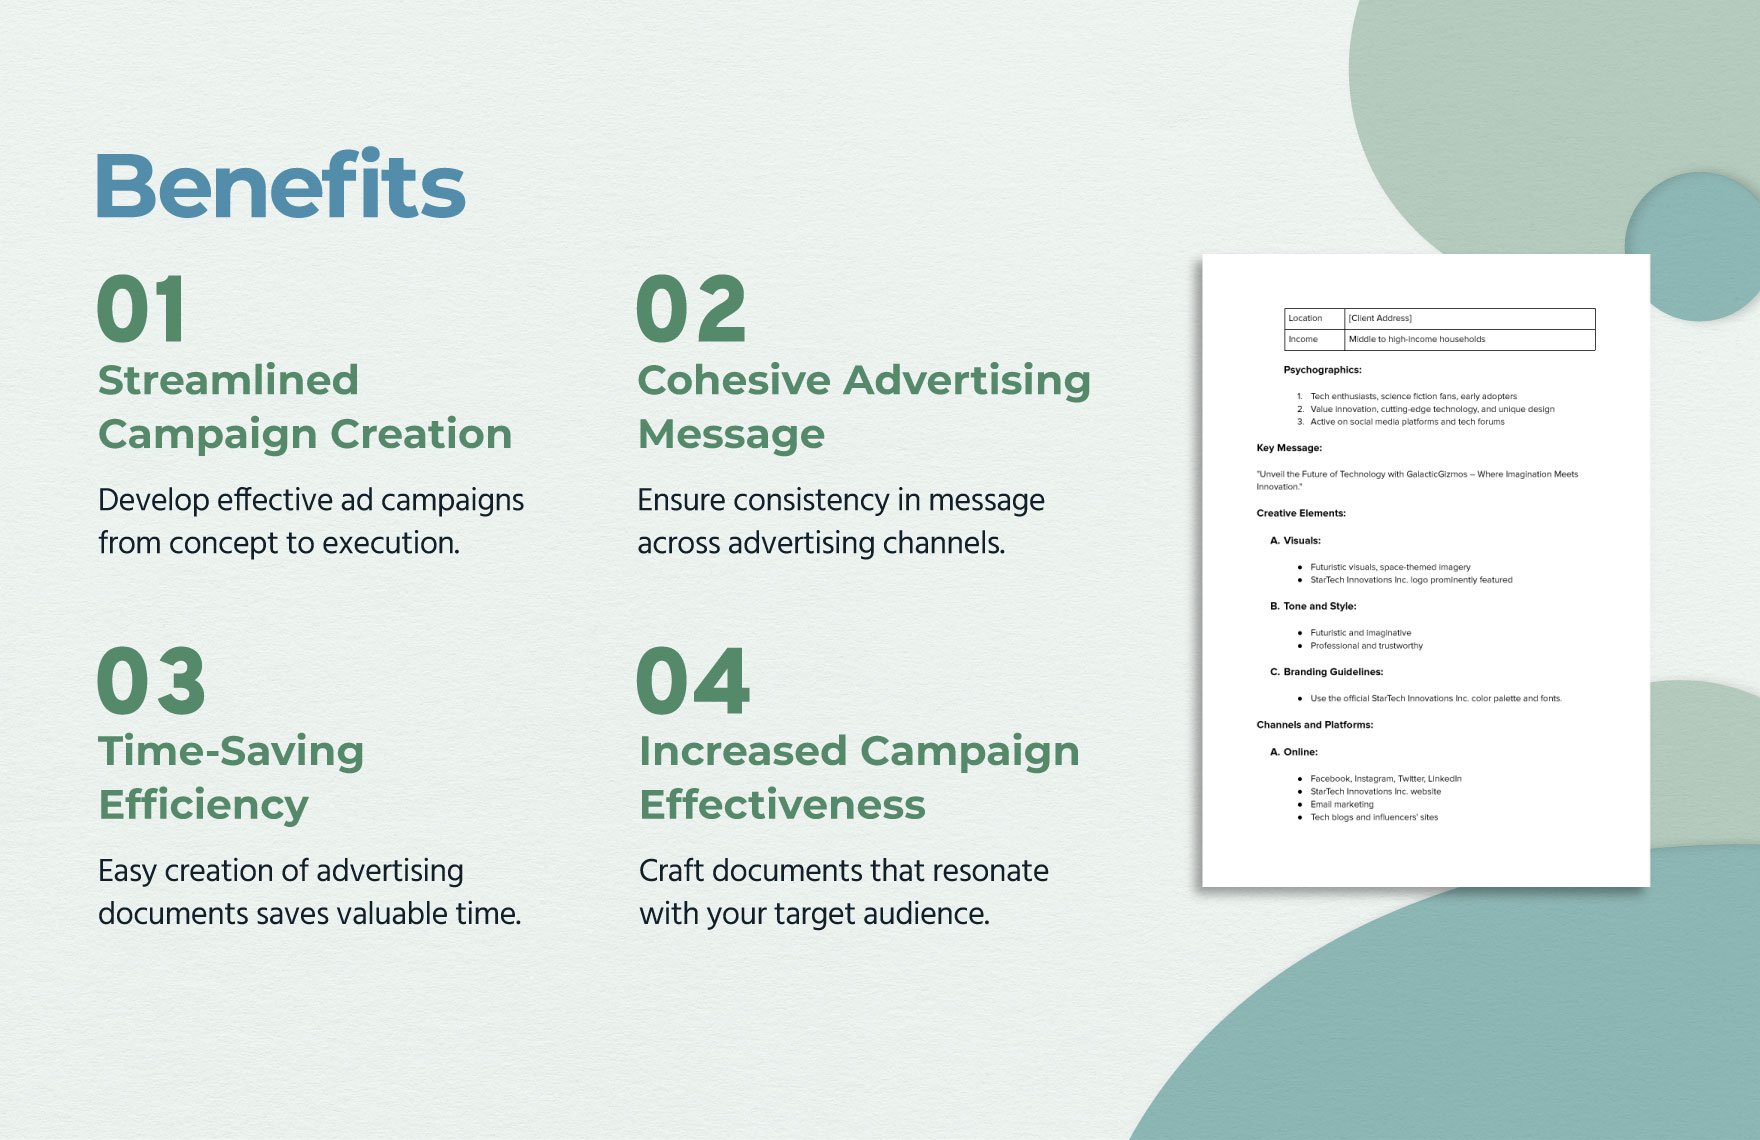 Advertising Campaign Brief Template